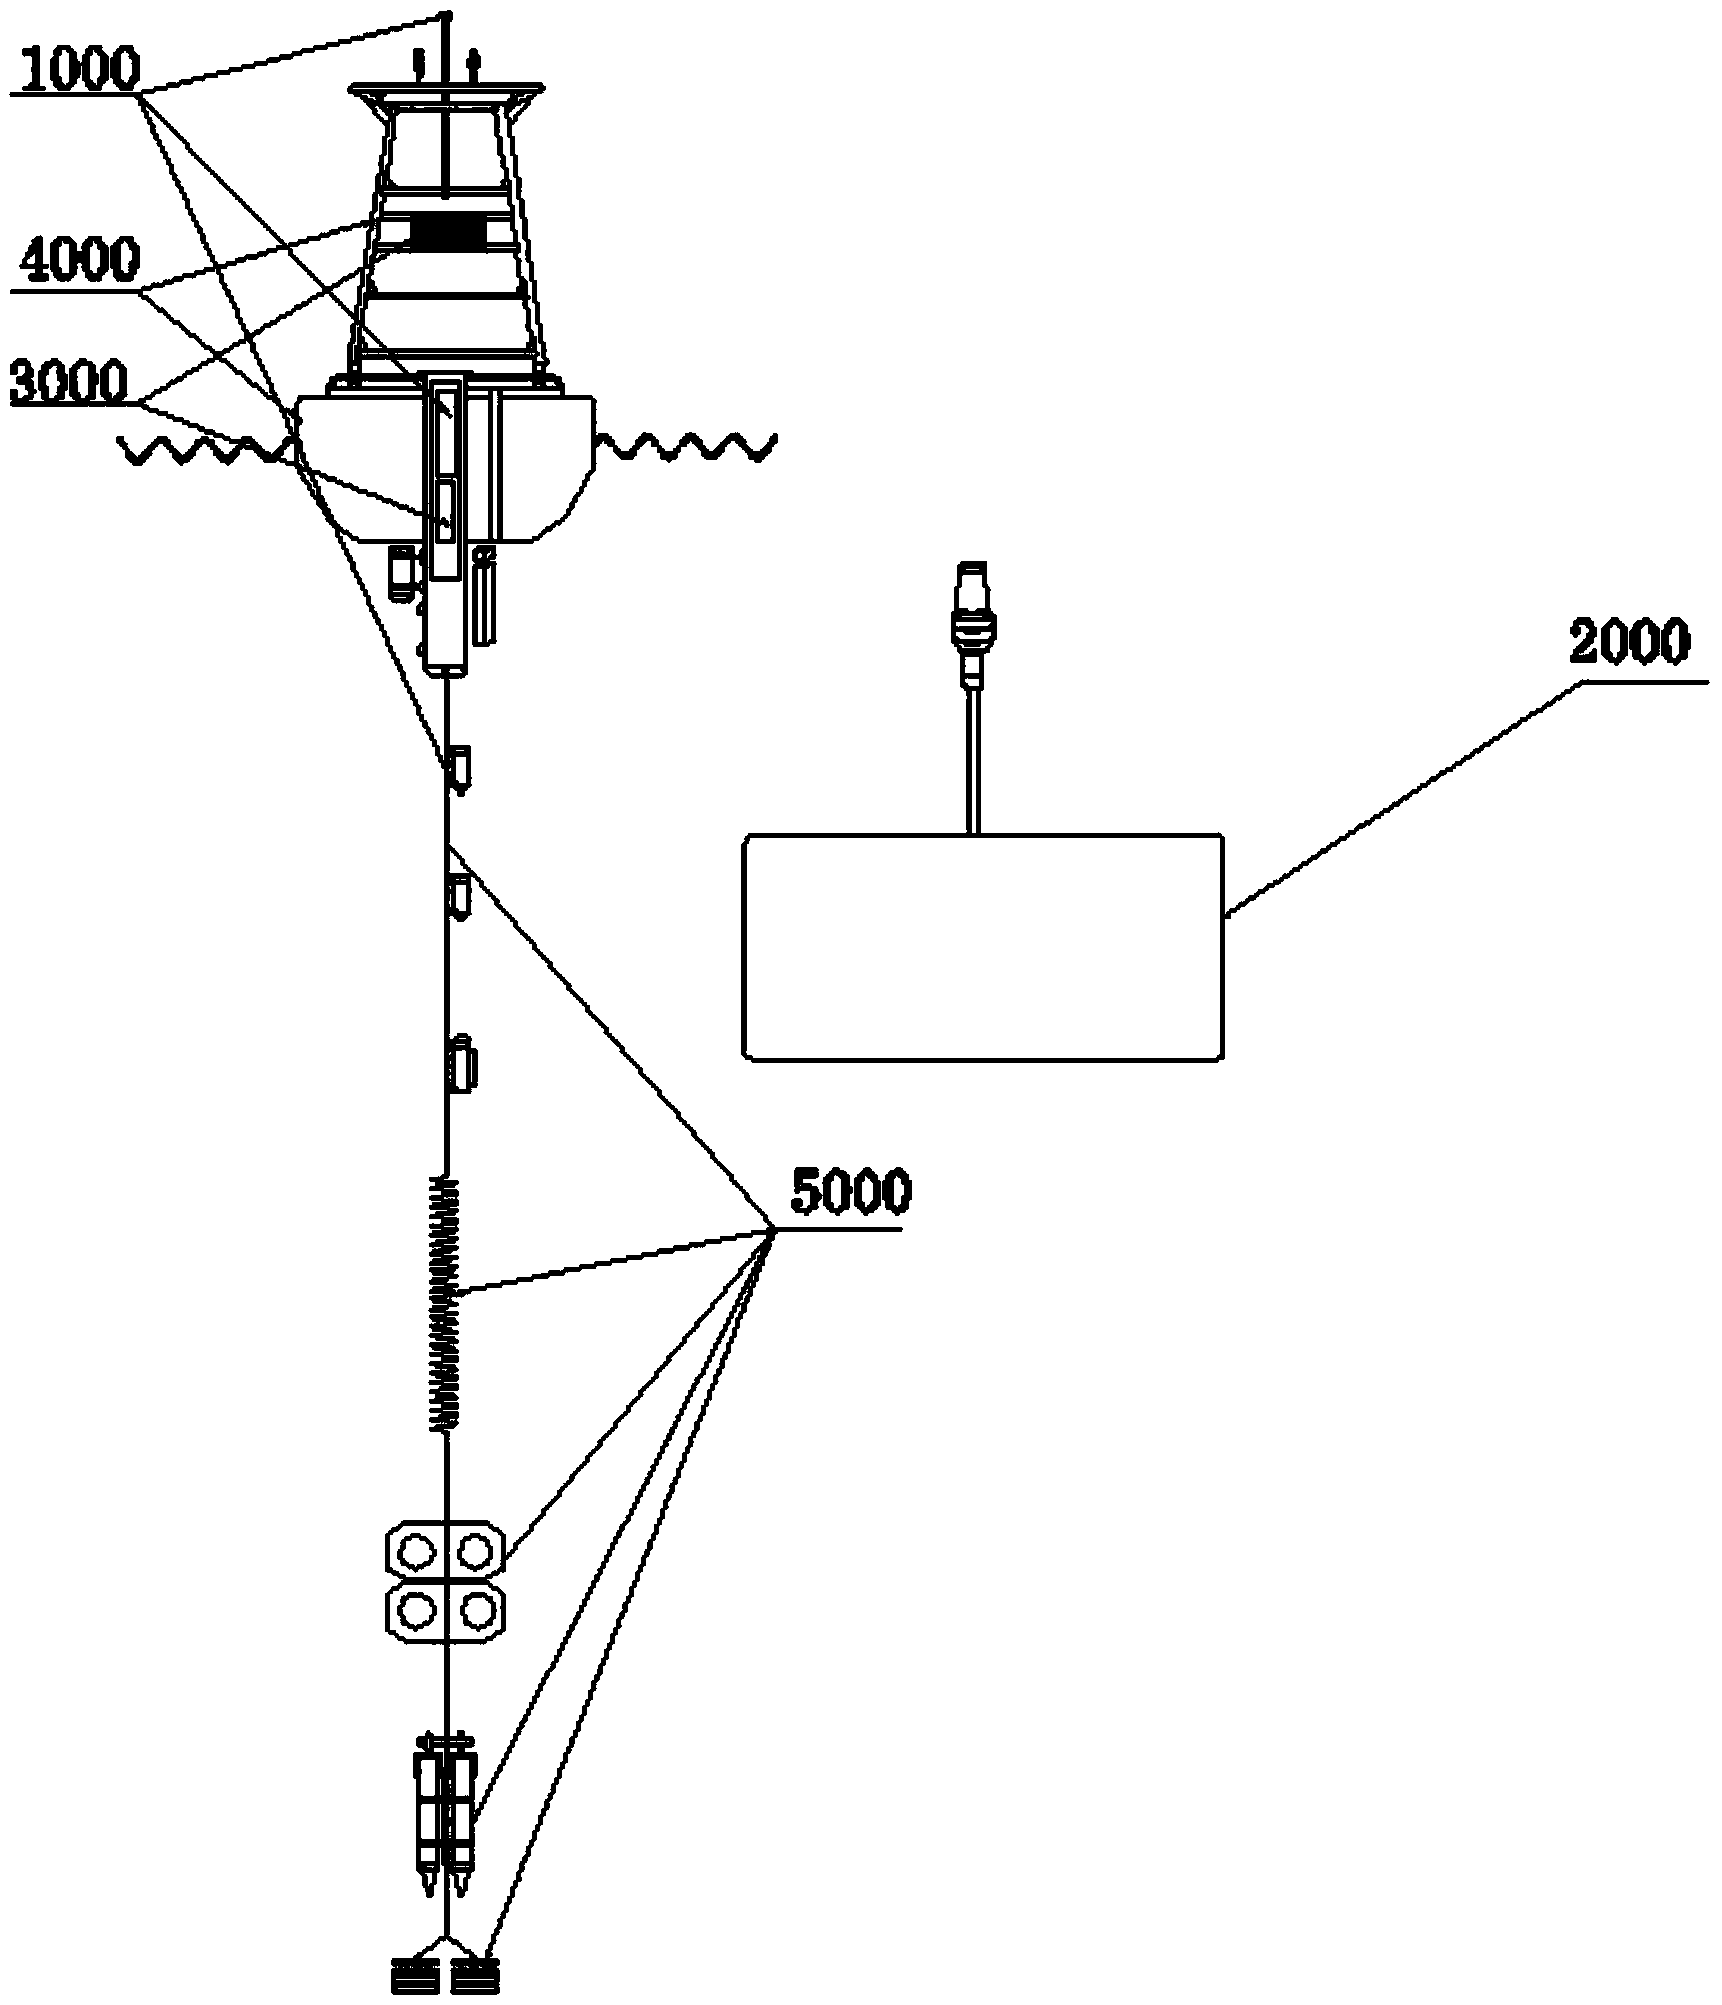 Deep-sea observing buoy system based on inductive coupling and satellite communication techniques